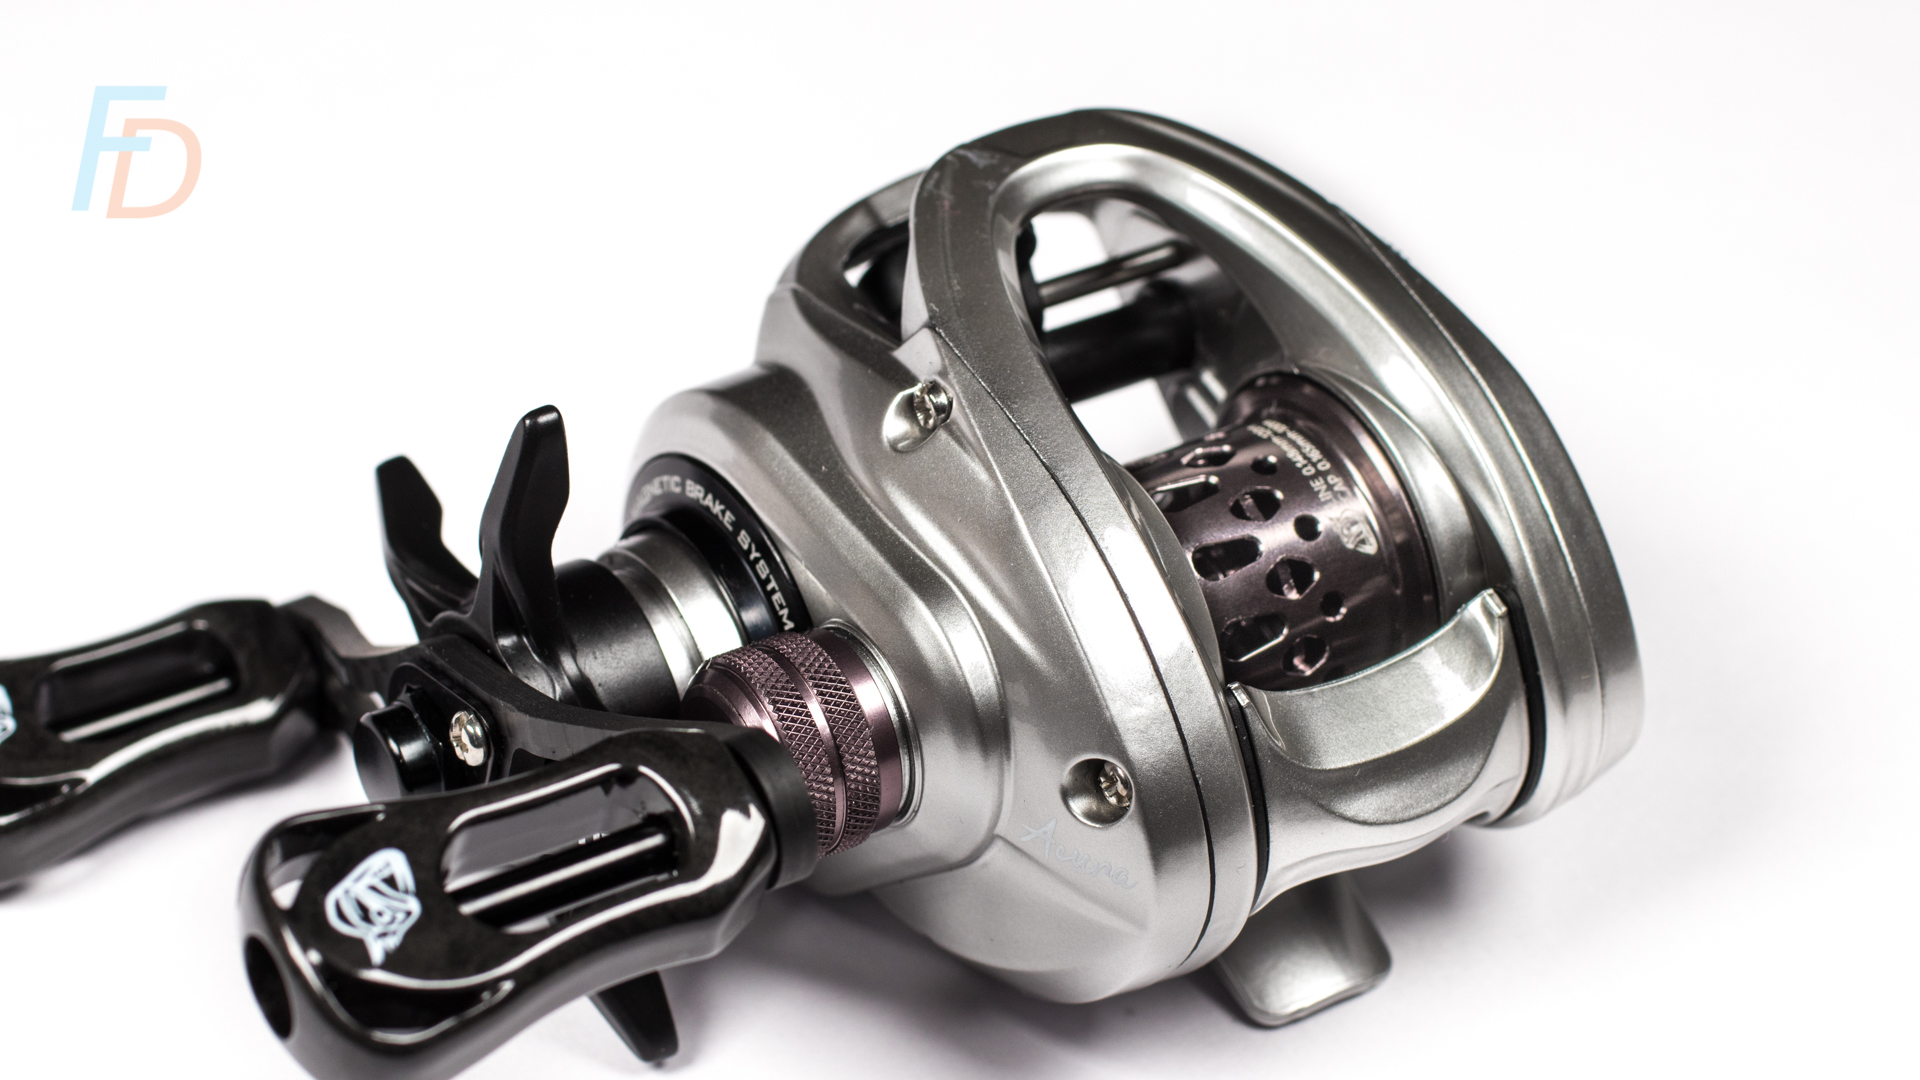 Soloking Acura HICC-50 (Doviello): Best Affordable BFS Reel?